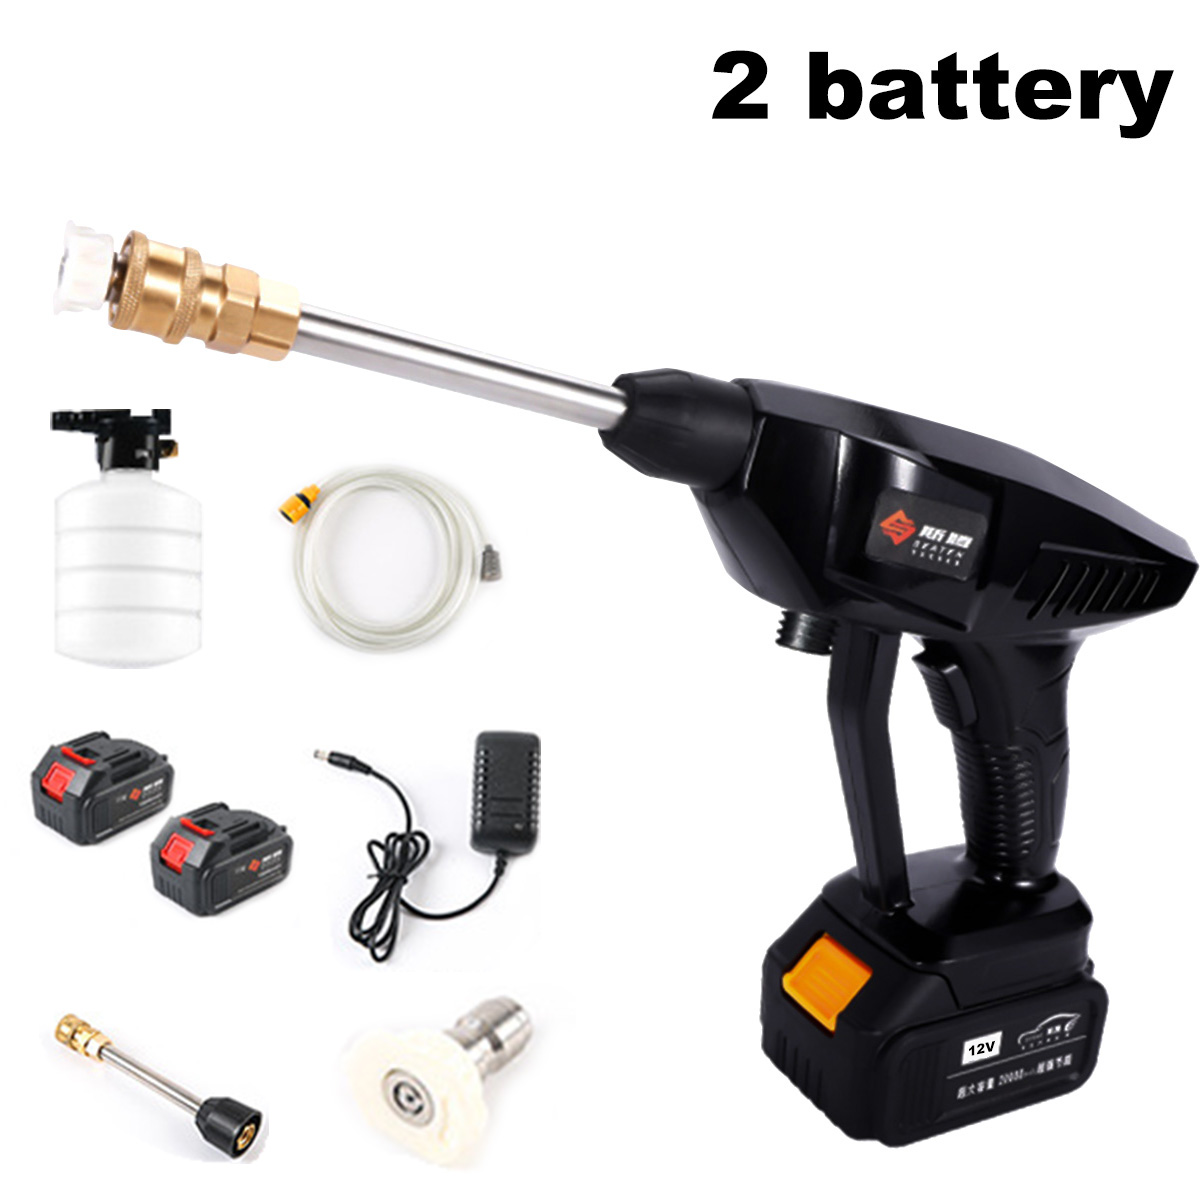 12V-15000mAh-Cordless-Electric-Pressure-Washer-Rechargeable-Car-Washing-Machine-Water-Spray-Guns-W-1-1830643-12